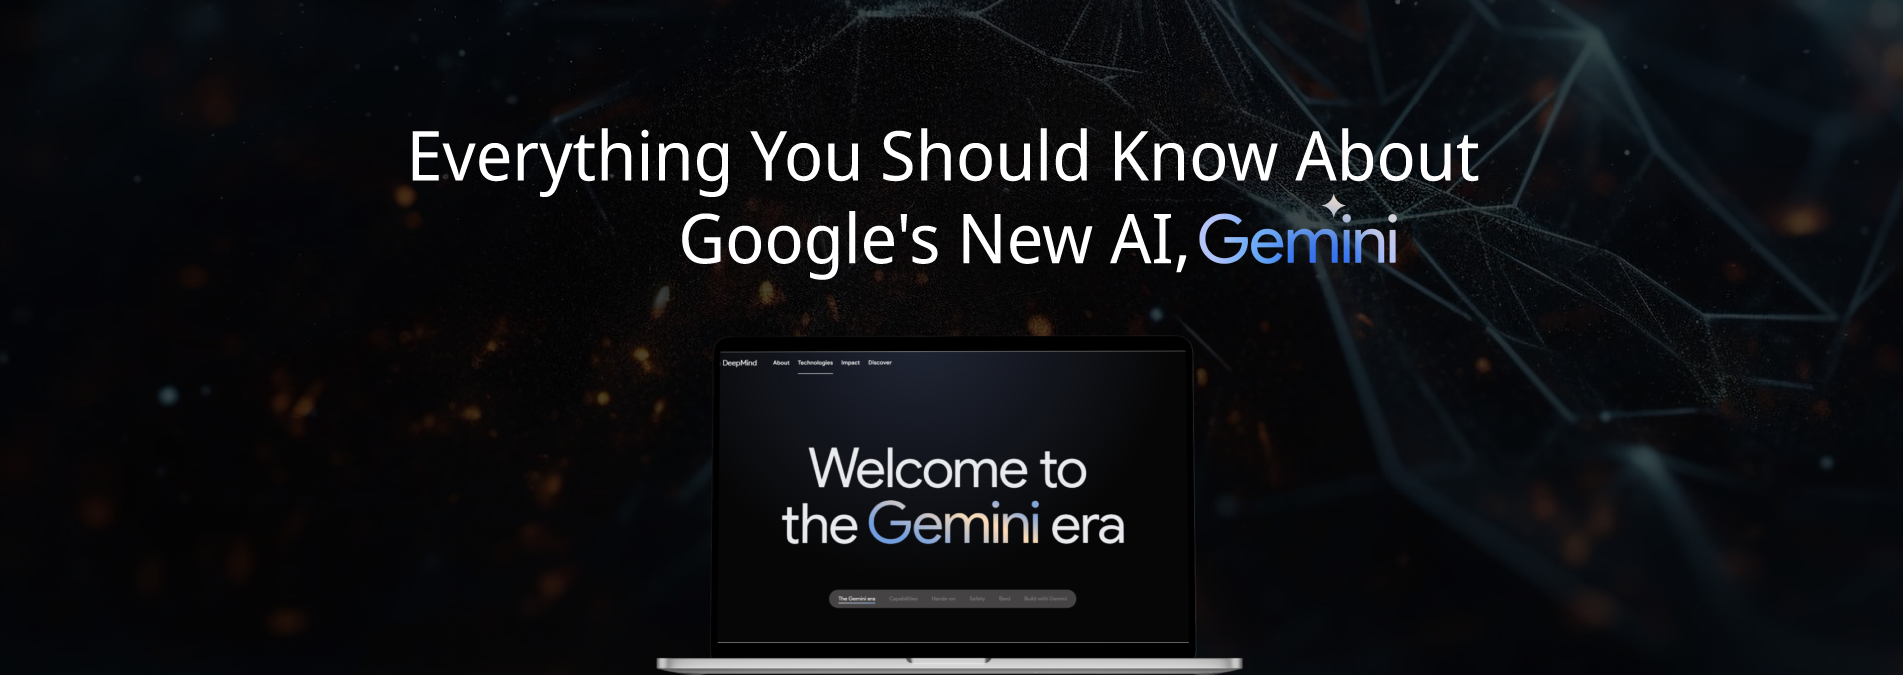 Everything you should know about Google’s new AI, Gemini?